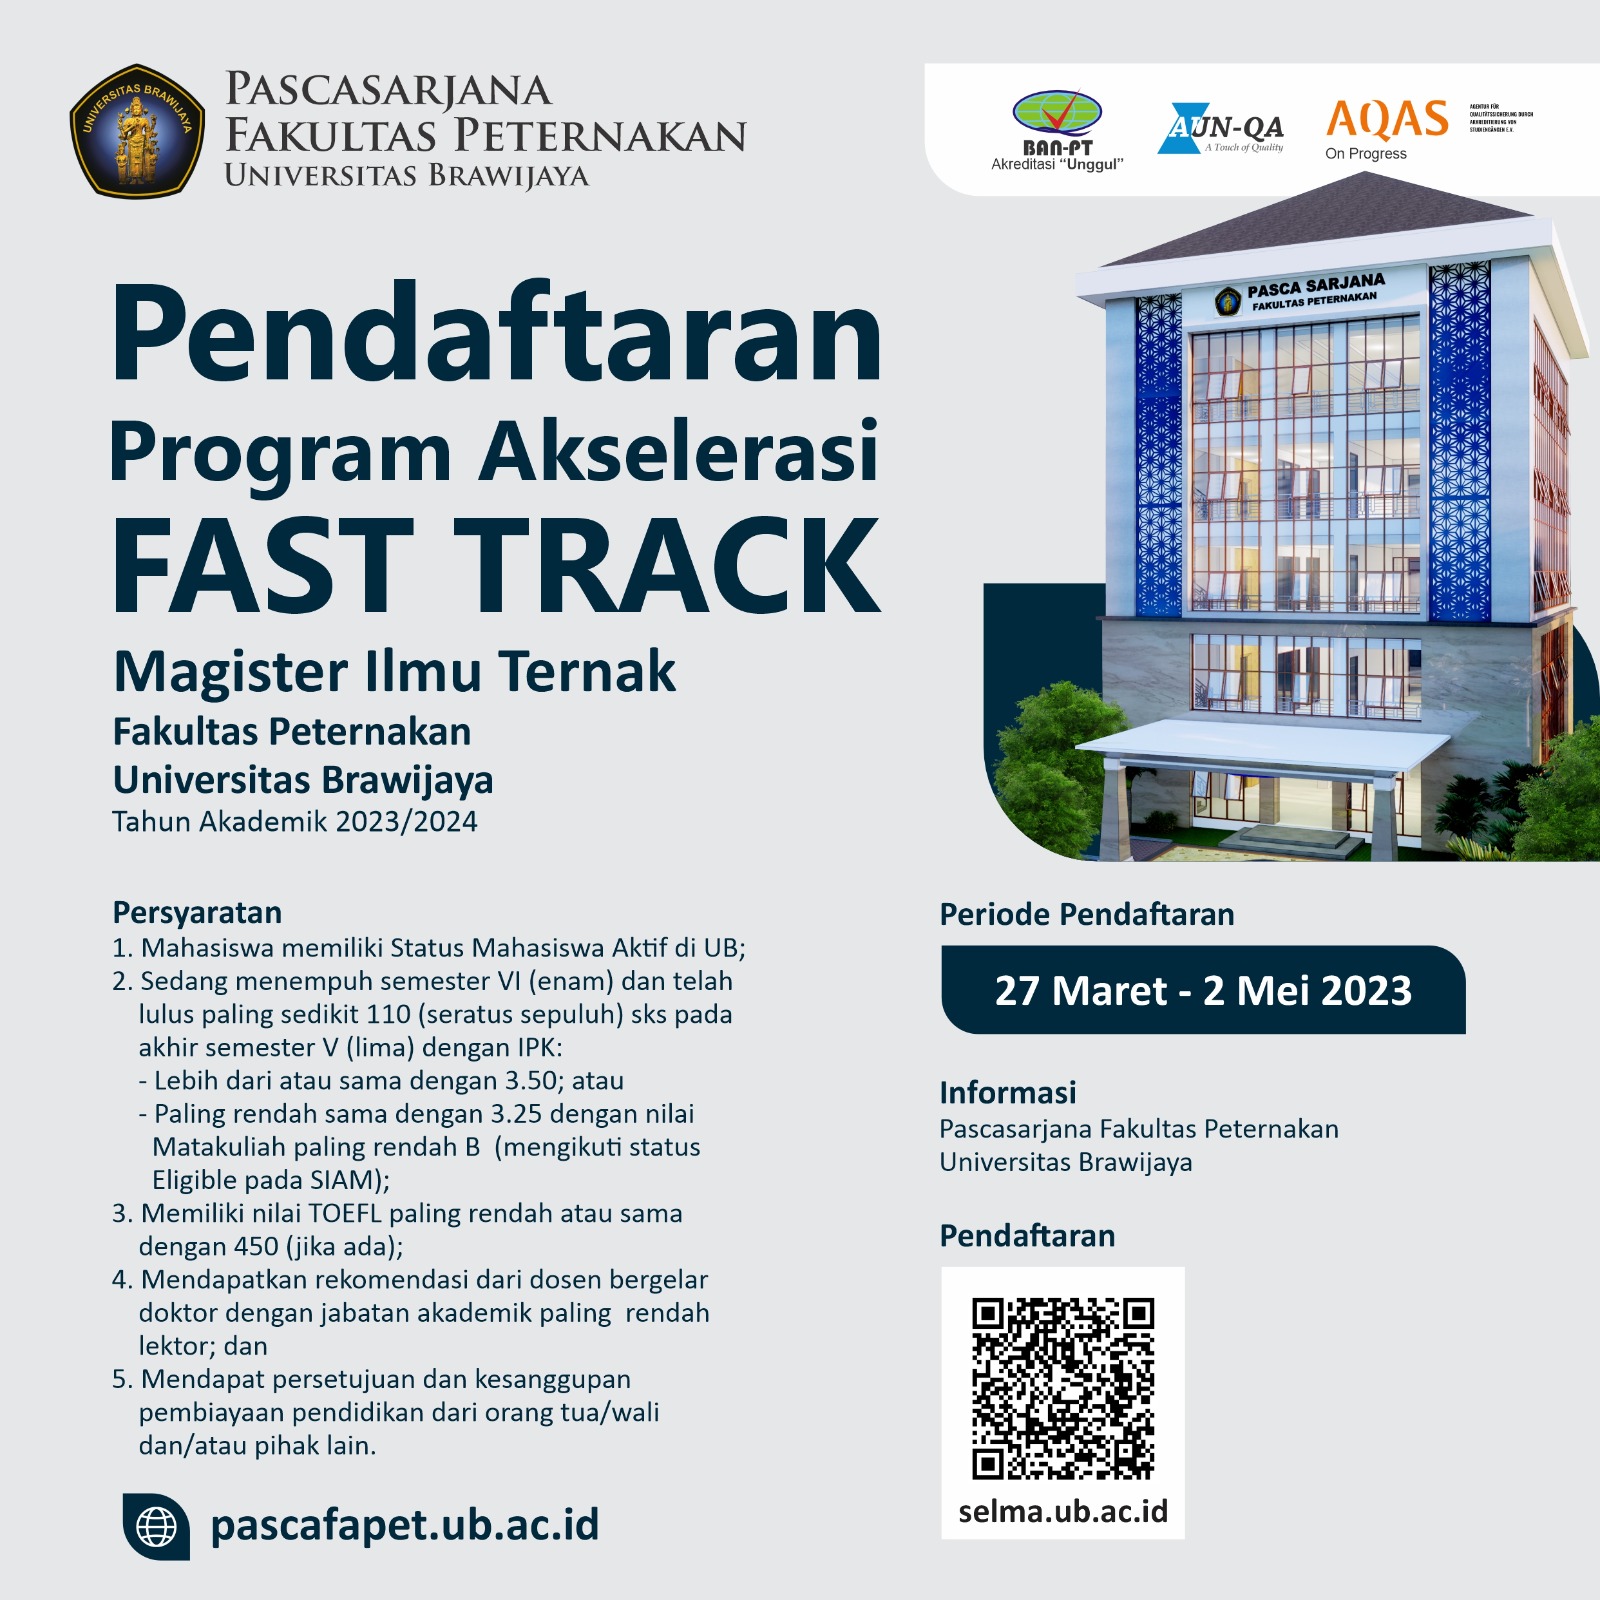 Registration for the Master of Animal Science Fast Track Program TA. 2023/2024